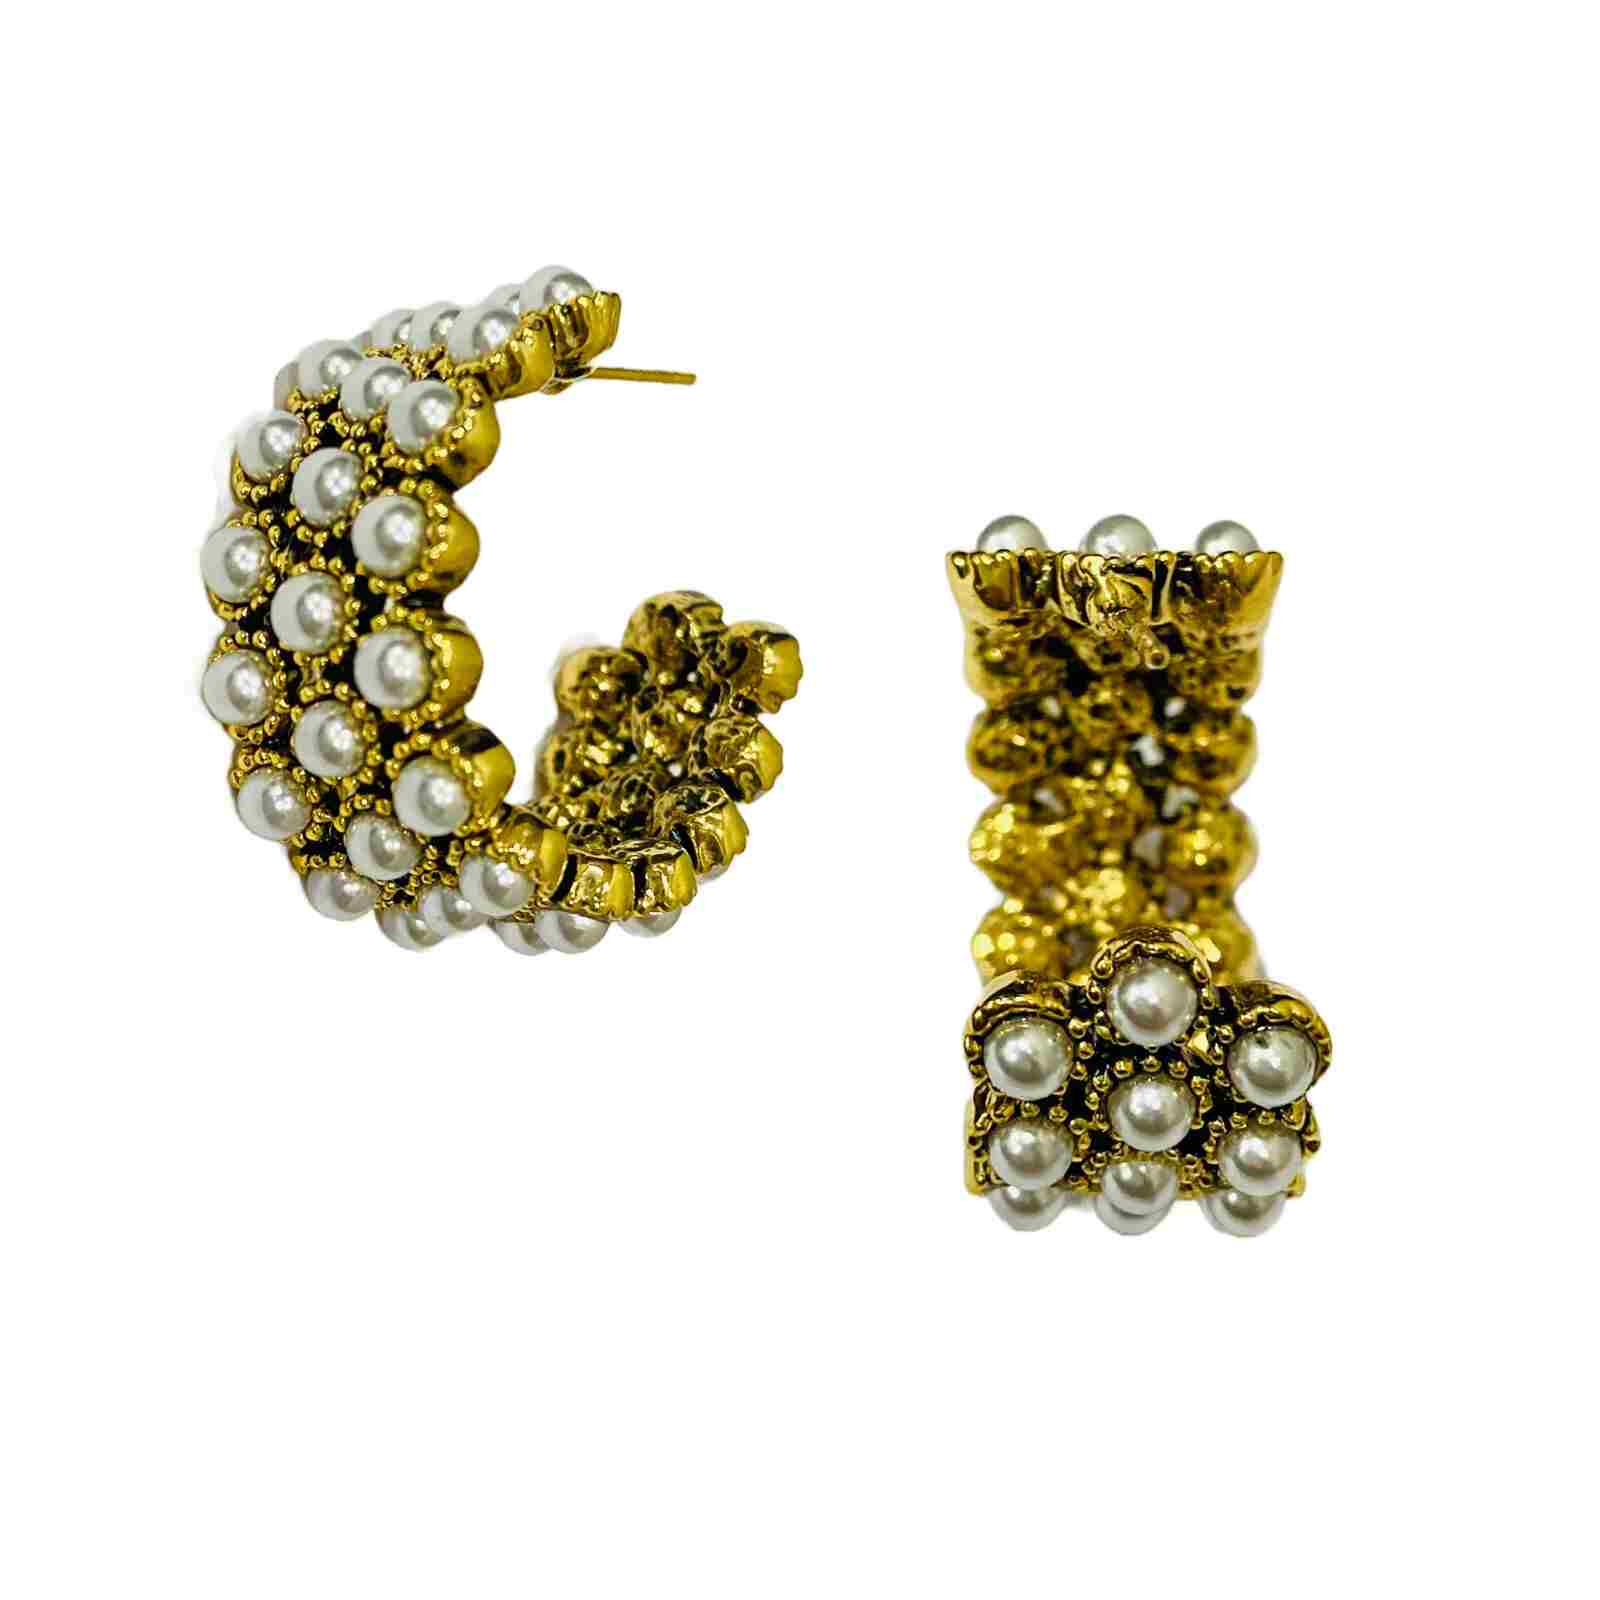 Pearl Studs | Gold Plated Earrings for Women | Artificial Jewelry